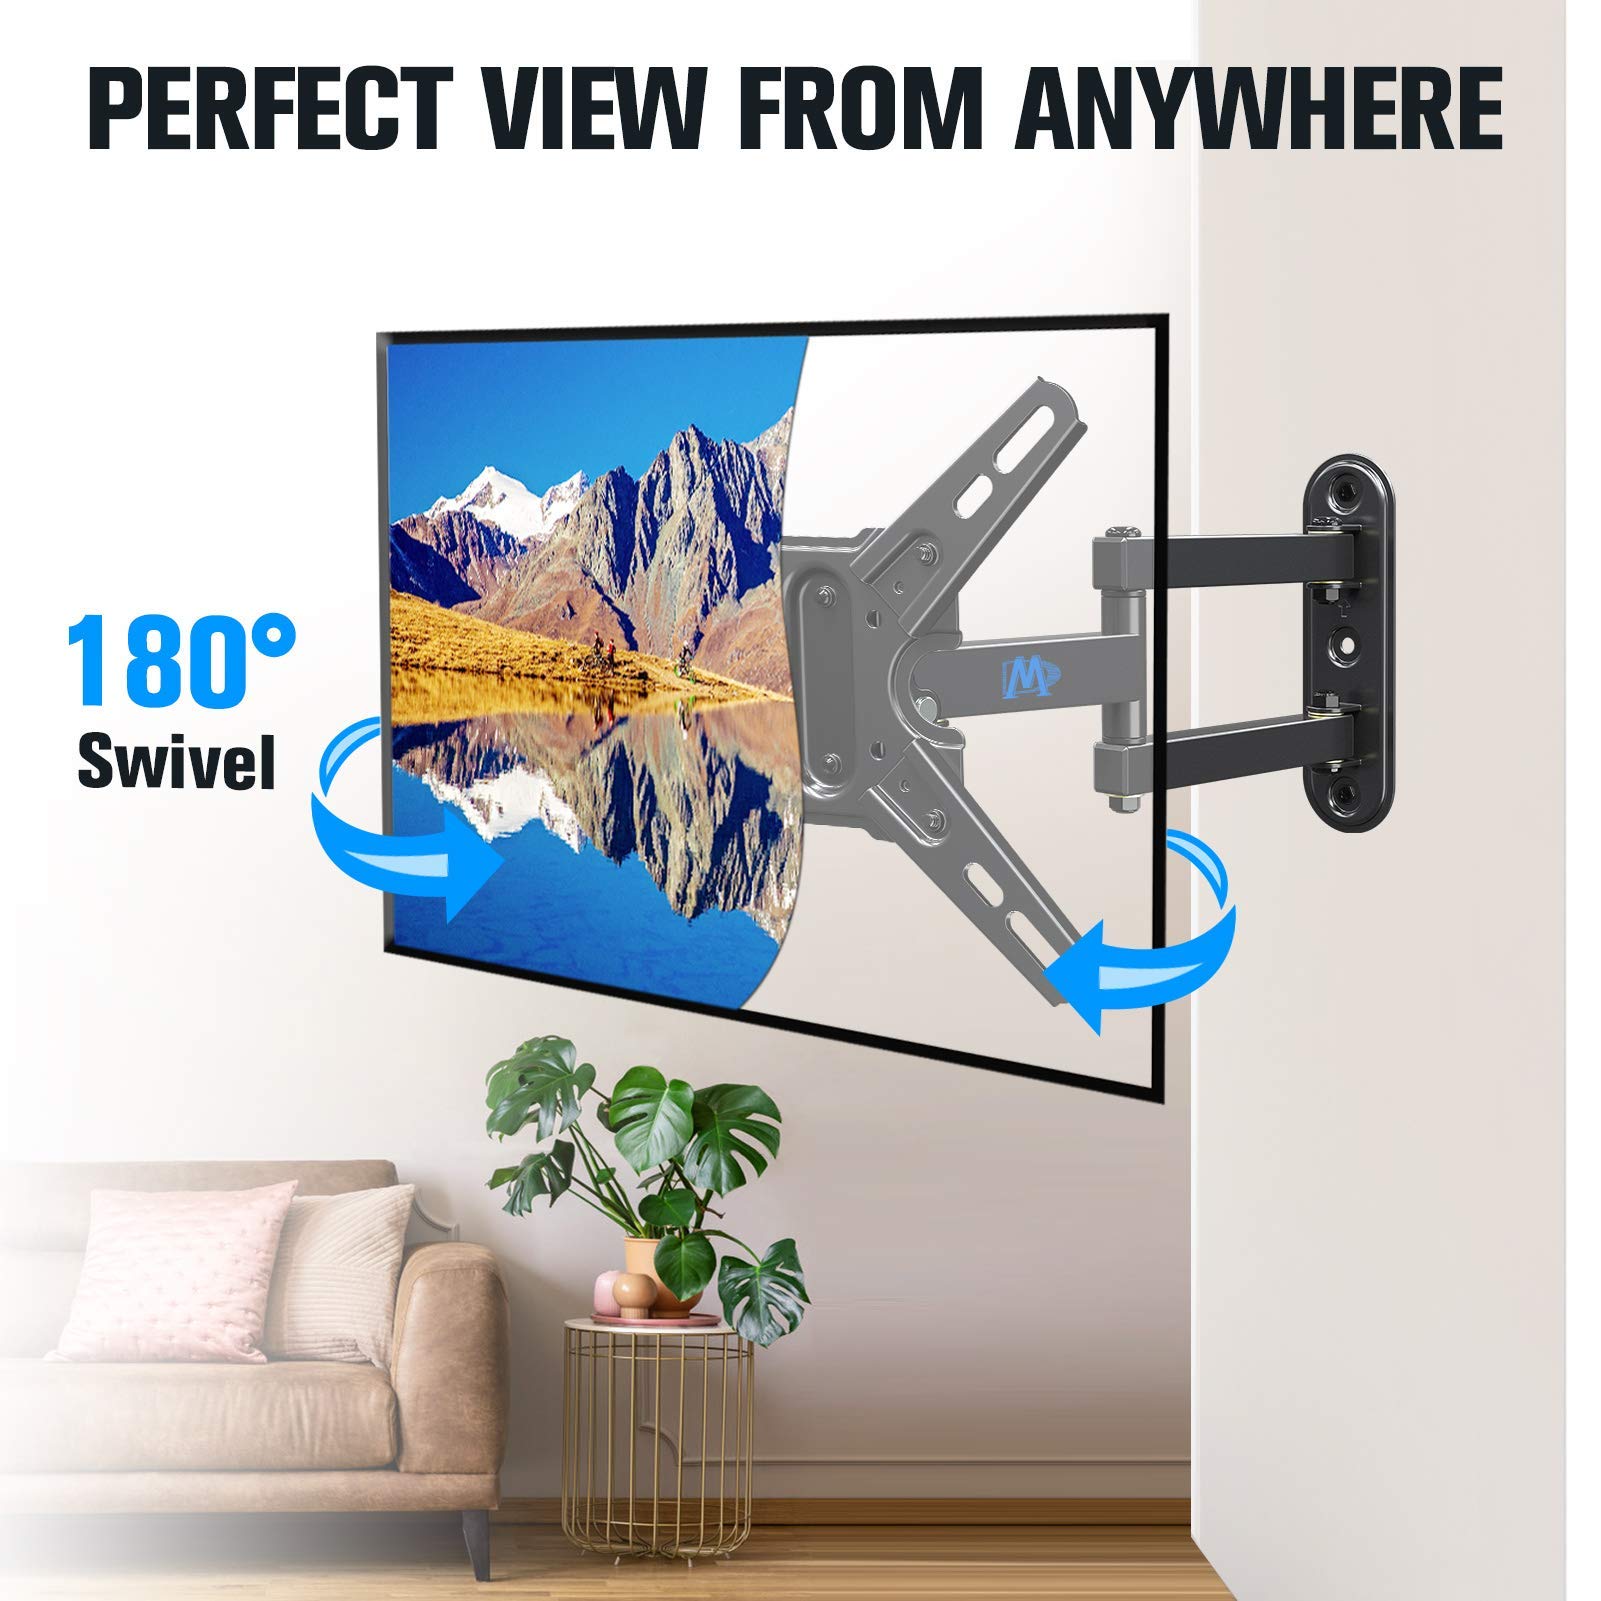 Mounting Dream MD2268-LK Tilt TV Wall Mount for 37-70 Inch TVs, Tilt TV Mount and MD2465 TV Mount Swivel and Tilt for Most 13-42 Inch TVs and Monitors, Max VESA 200x200mm, Loading 50 lbs